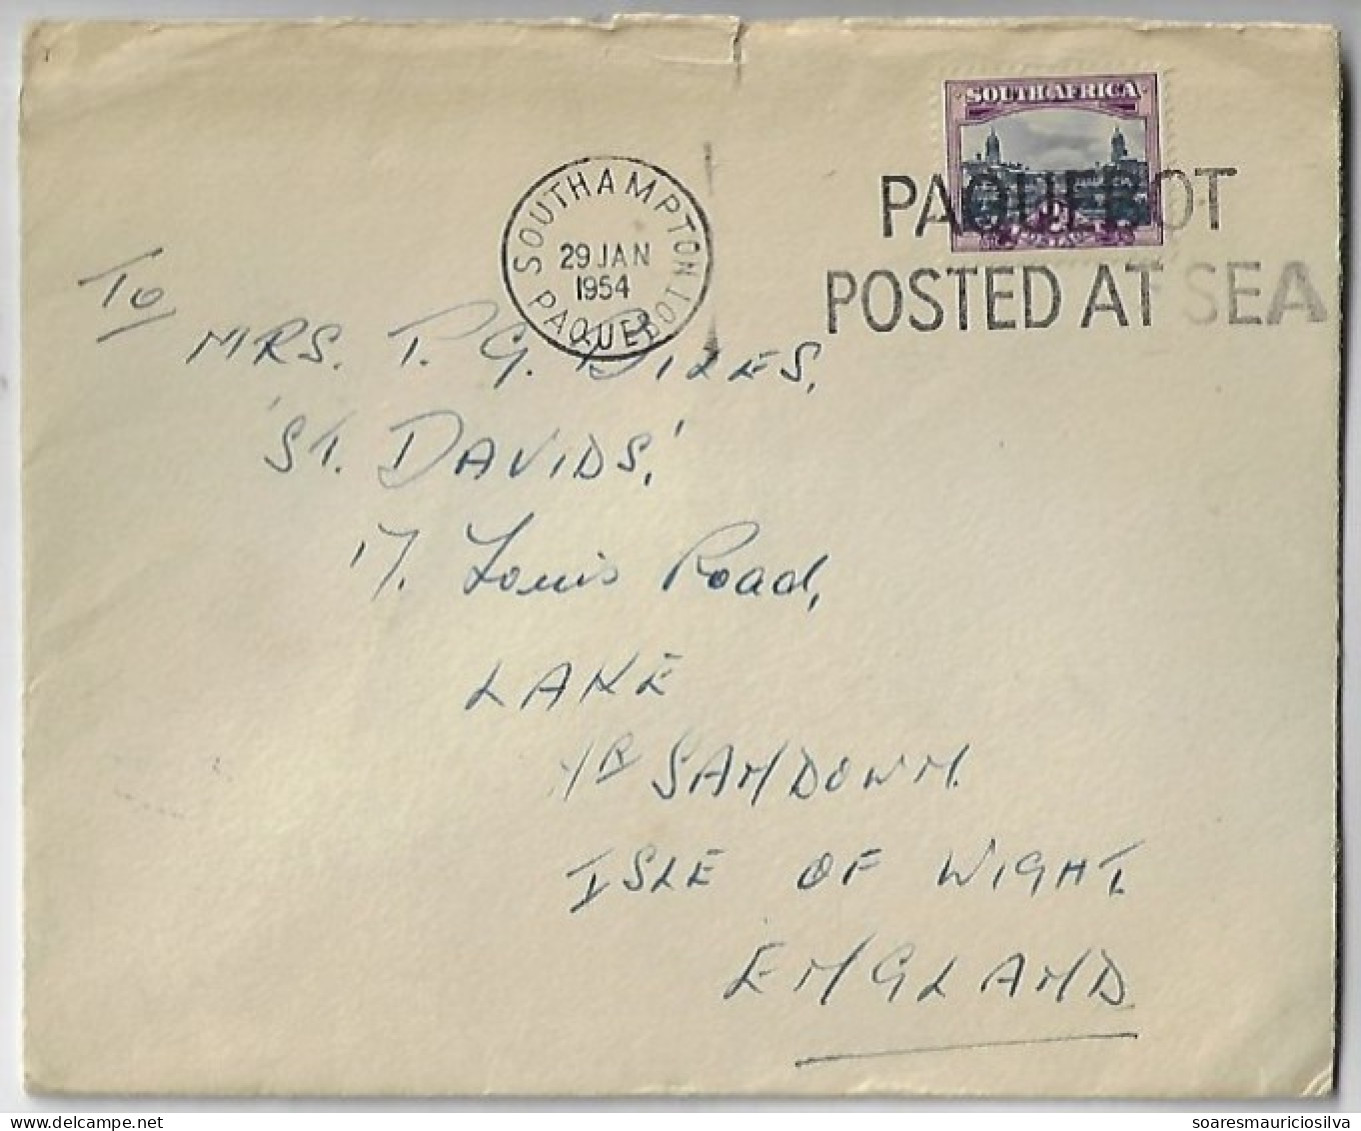 South Africa 1954 Union-Castle Line Cover Cancel Southampton Paquebot Posted At Sea Addressed To Great Britain - Covers & Documents